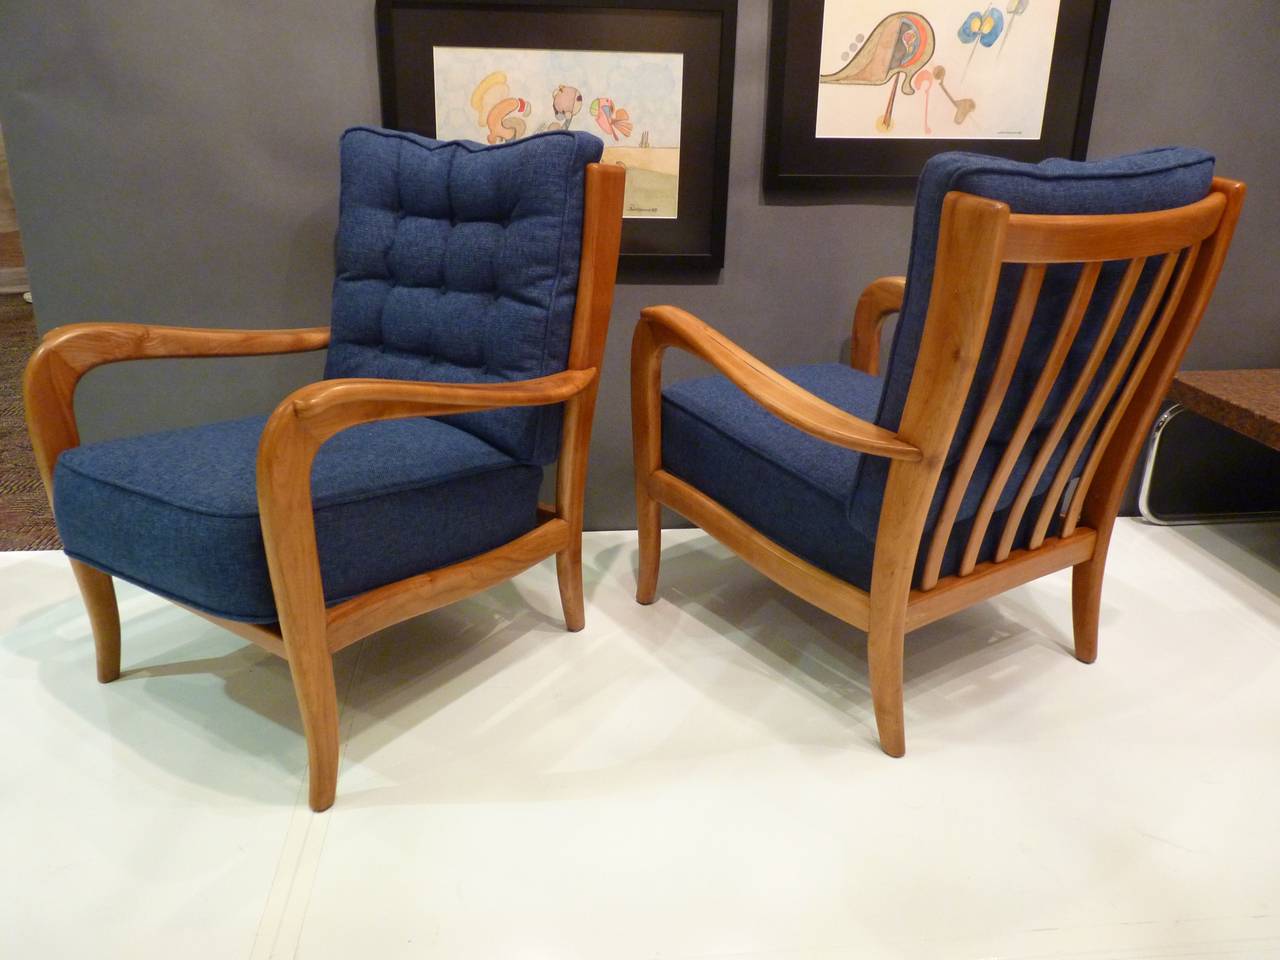 Pair of chairs attributed to Paolo Buffa made of solid Italian walnut, circa 1950s. Original spring cushions have been preserved and upholstery is redone in a blue fabric similar to original as shown.